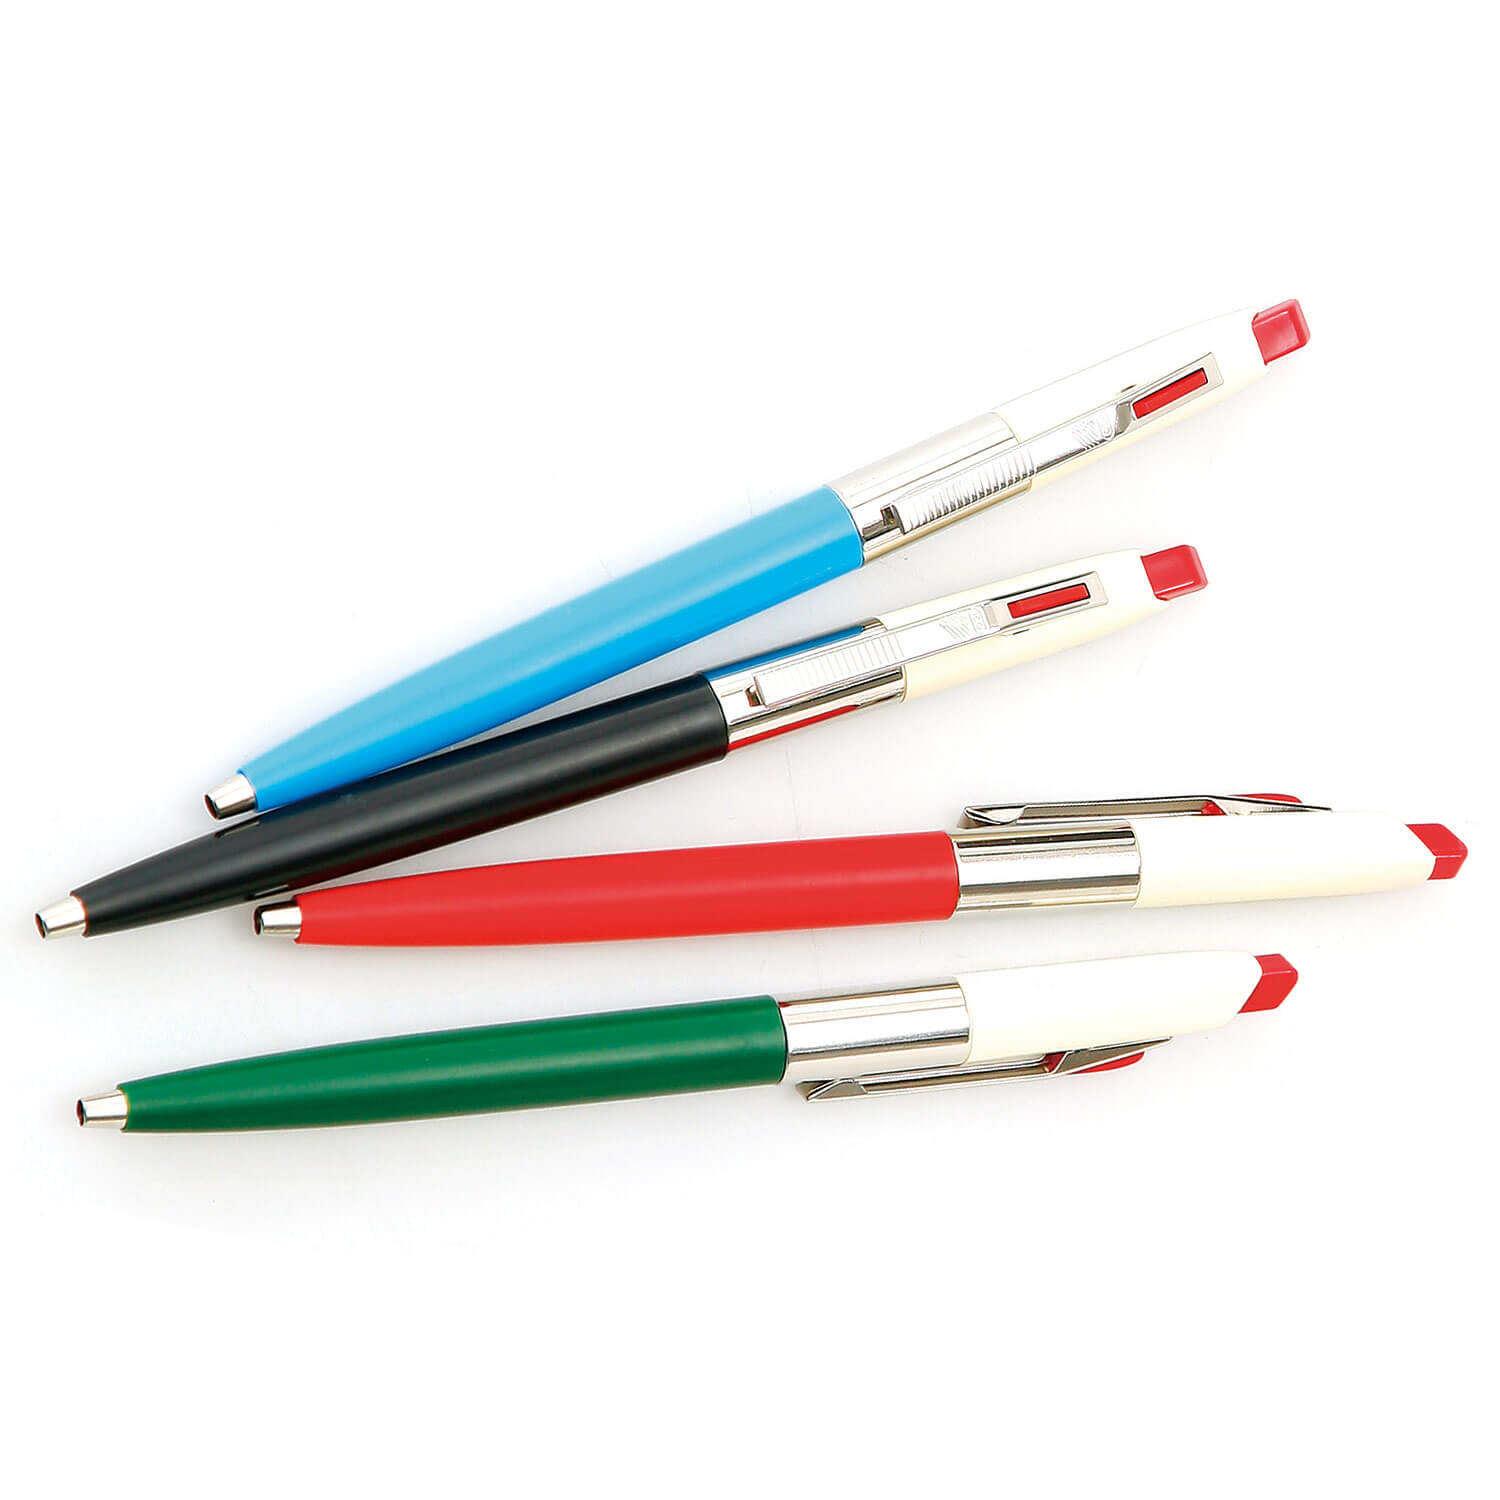 products/hightide-retro-pen-all-colors-1500x1500.jpg